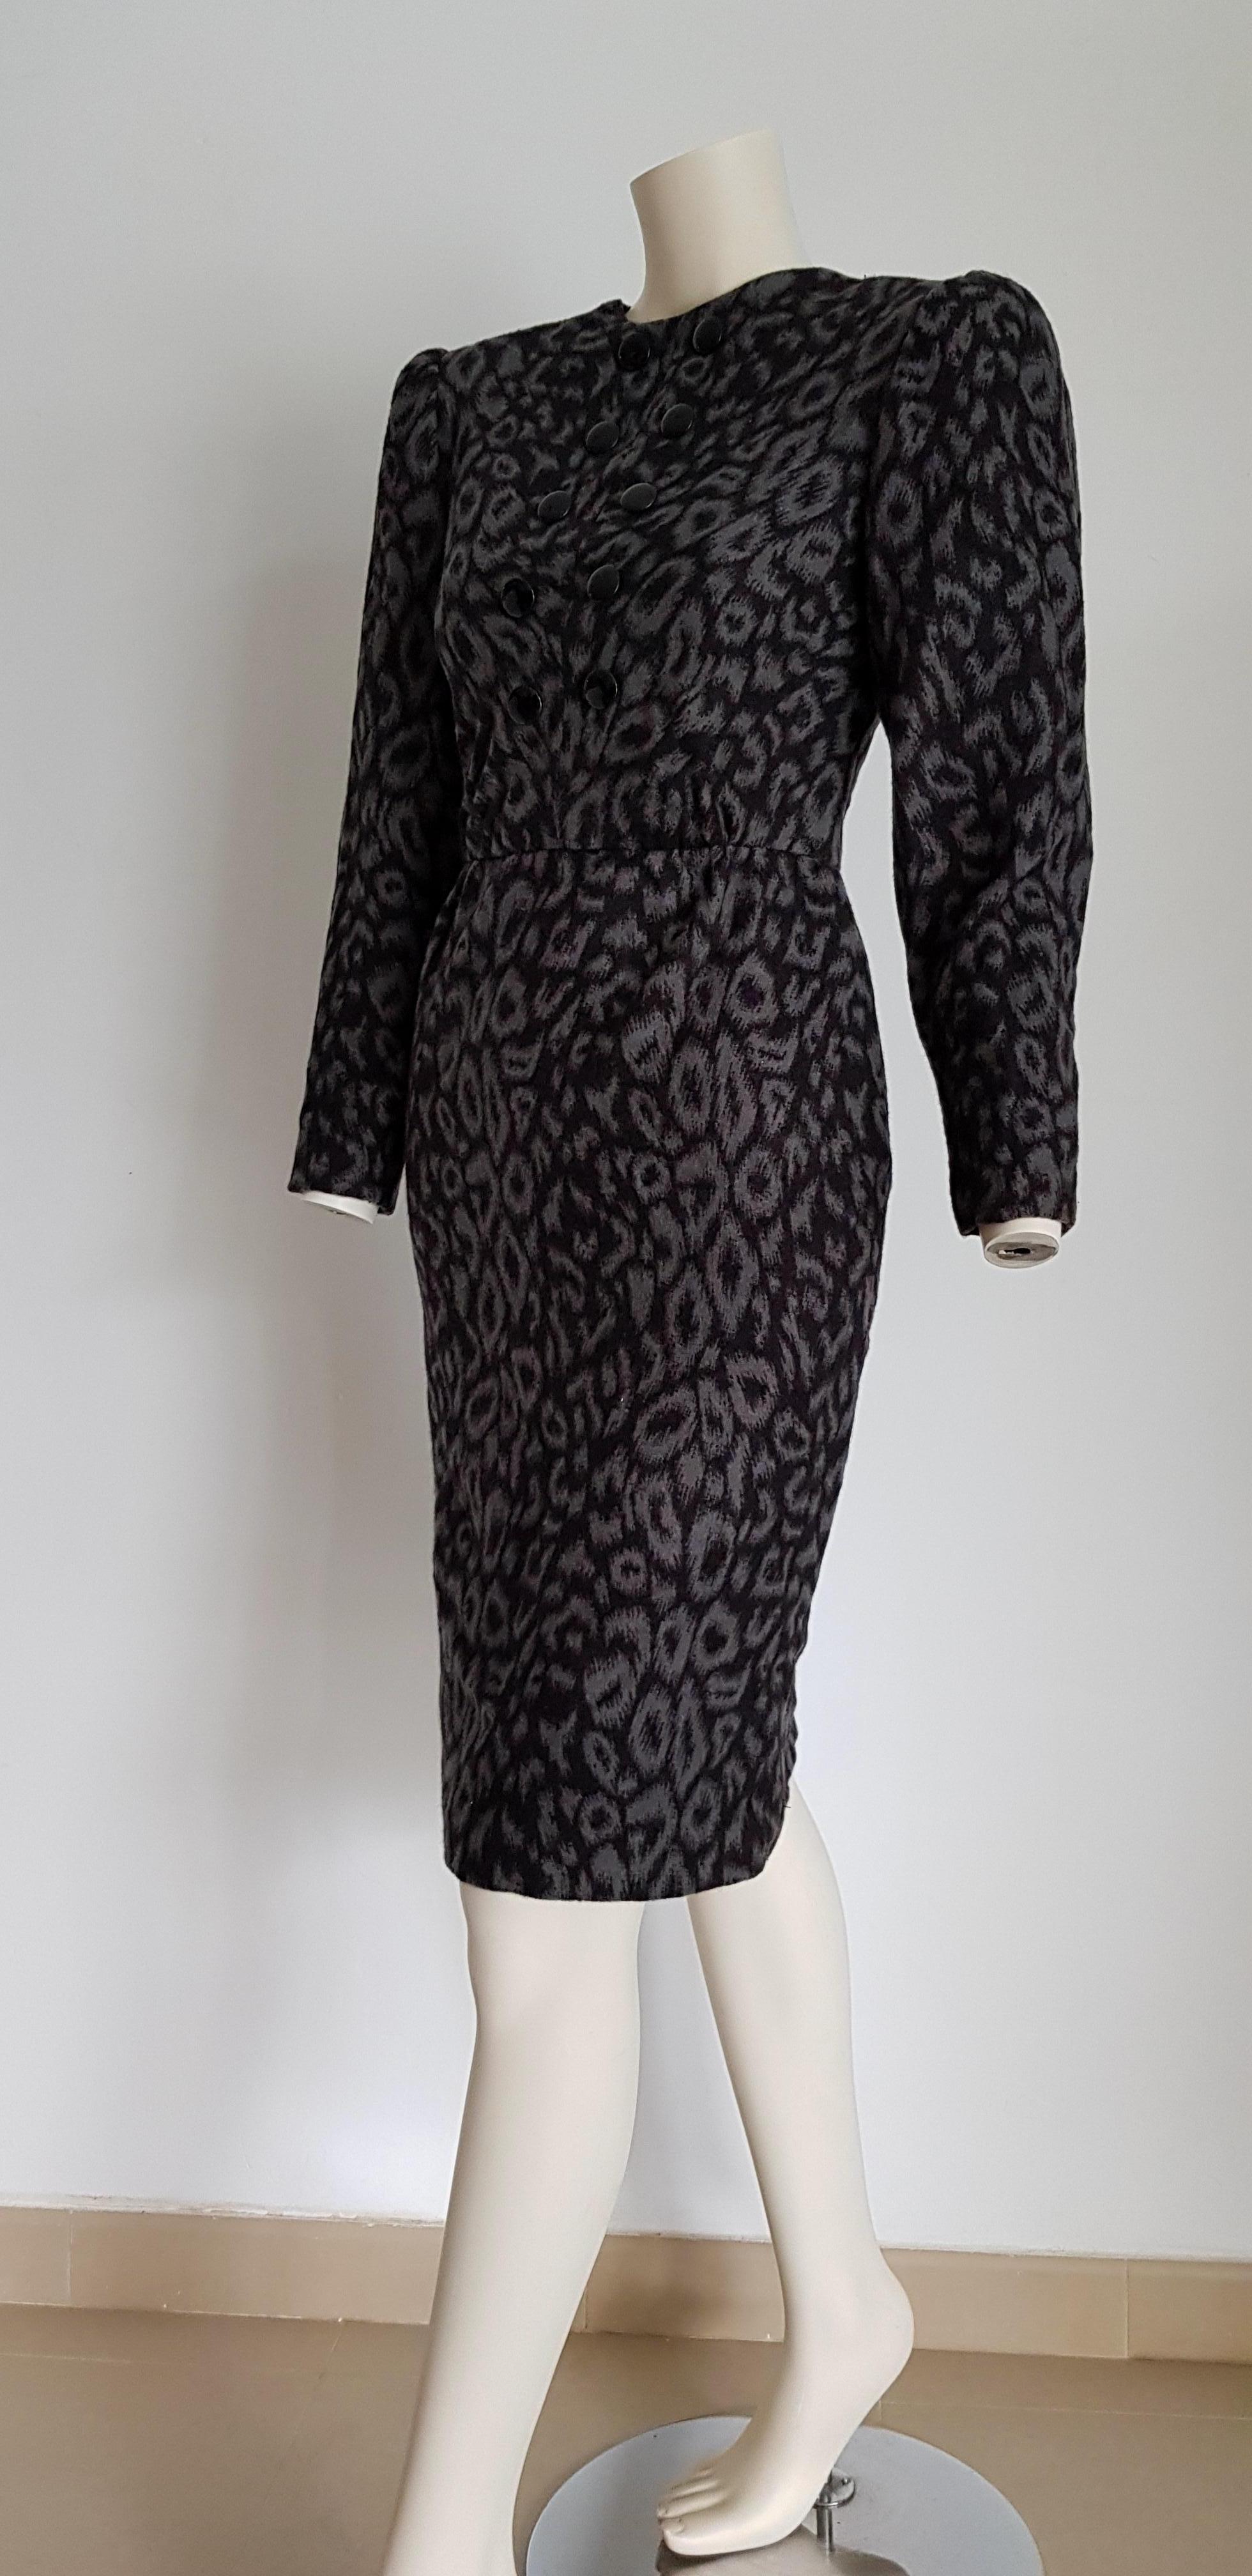 VALENTINO black and grey leopard print cashmere dress - Unworn, New.
..
SIZE: equivalent to about Small / Medium, please review approx measurements as follows in cm: lenght 102, chest underarm to underarm 48, bust circumference 87, shoulder from